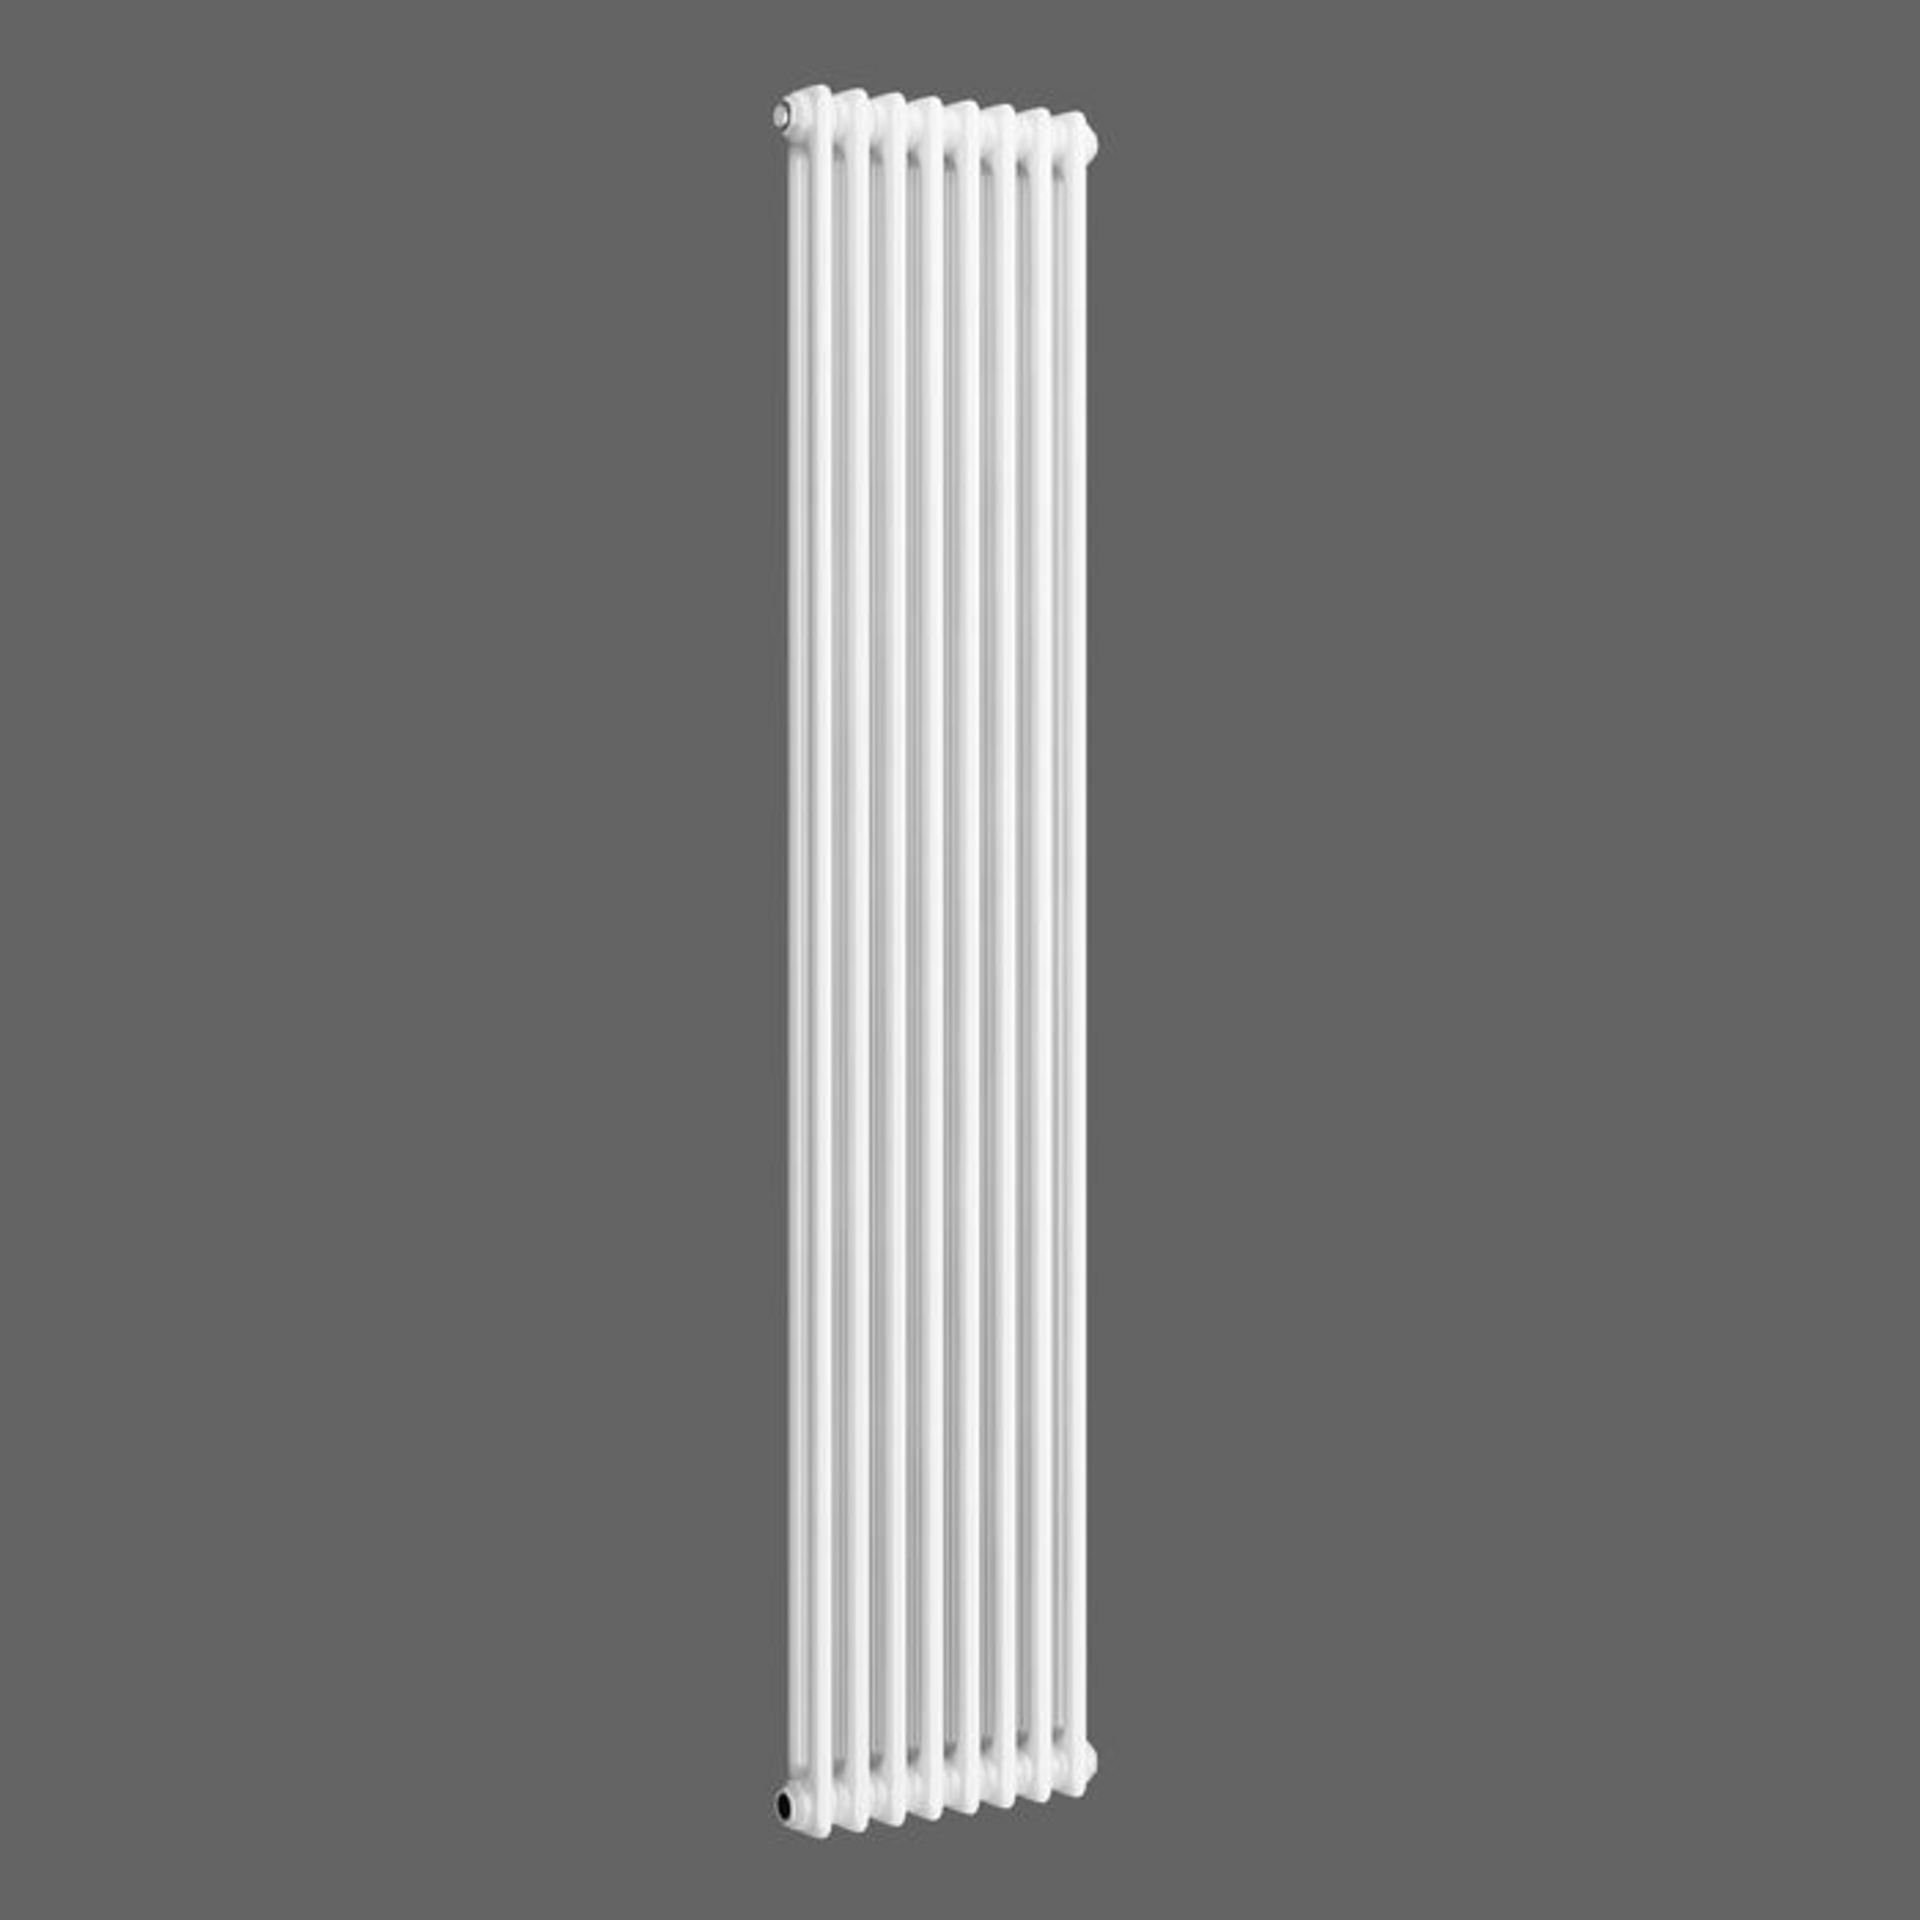 (DD132) 2000x306mm White Double Panel Vertical Colosseum Traditional Radiator. RRP £326.99. ... - Image 4 of 4